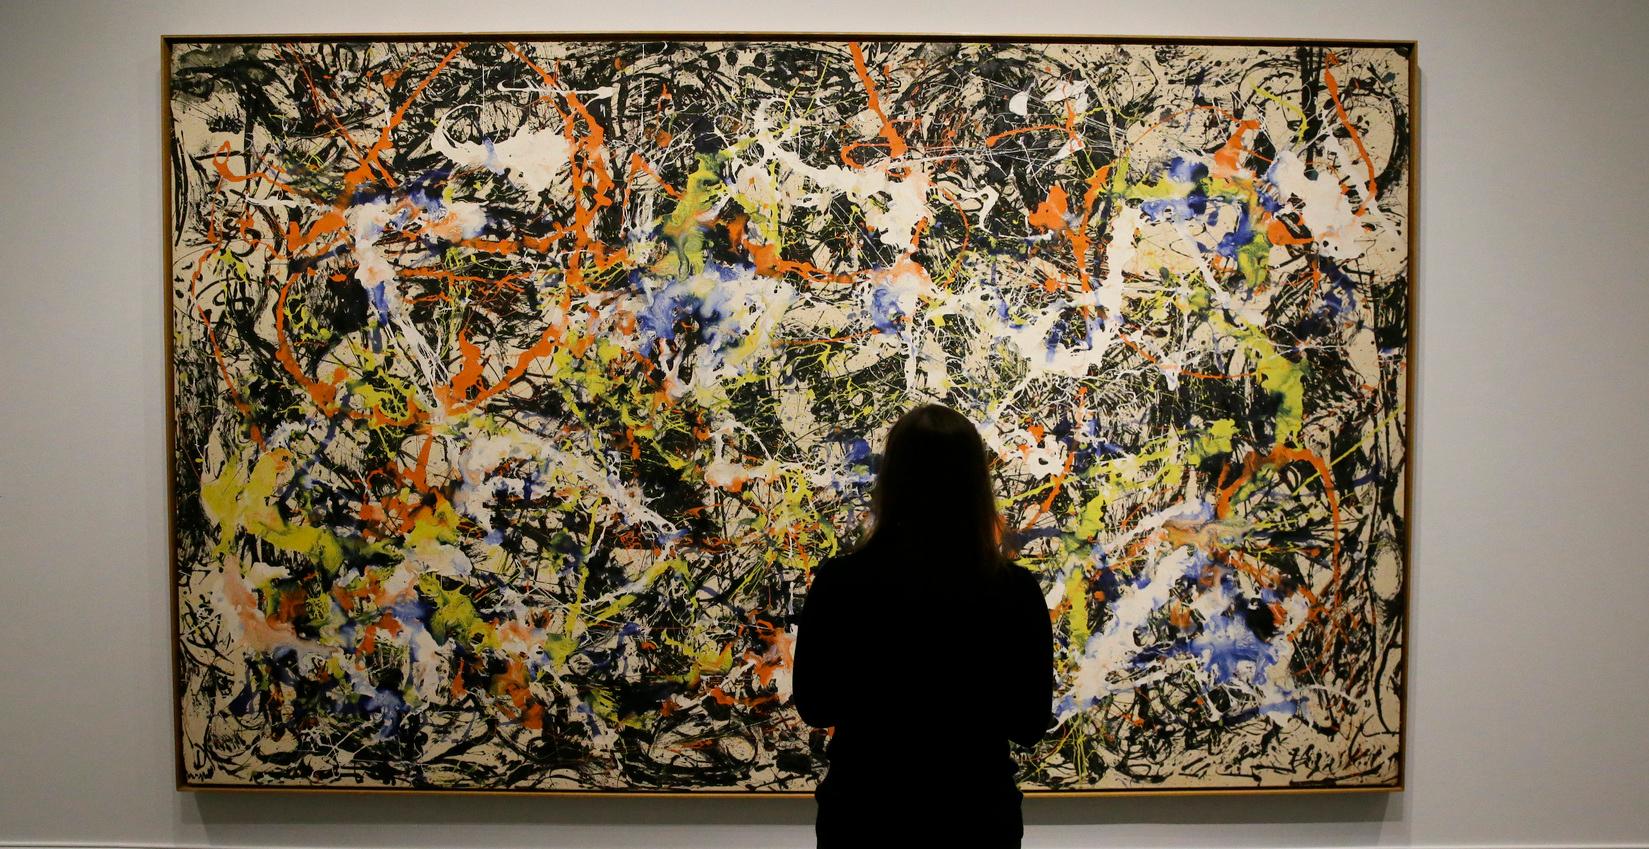 Are fractals the key to why Pollock’s work captivates?